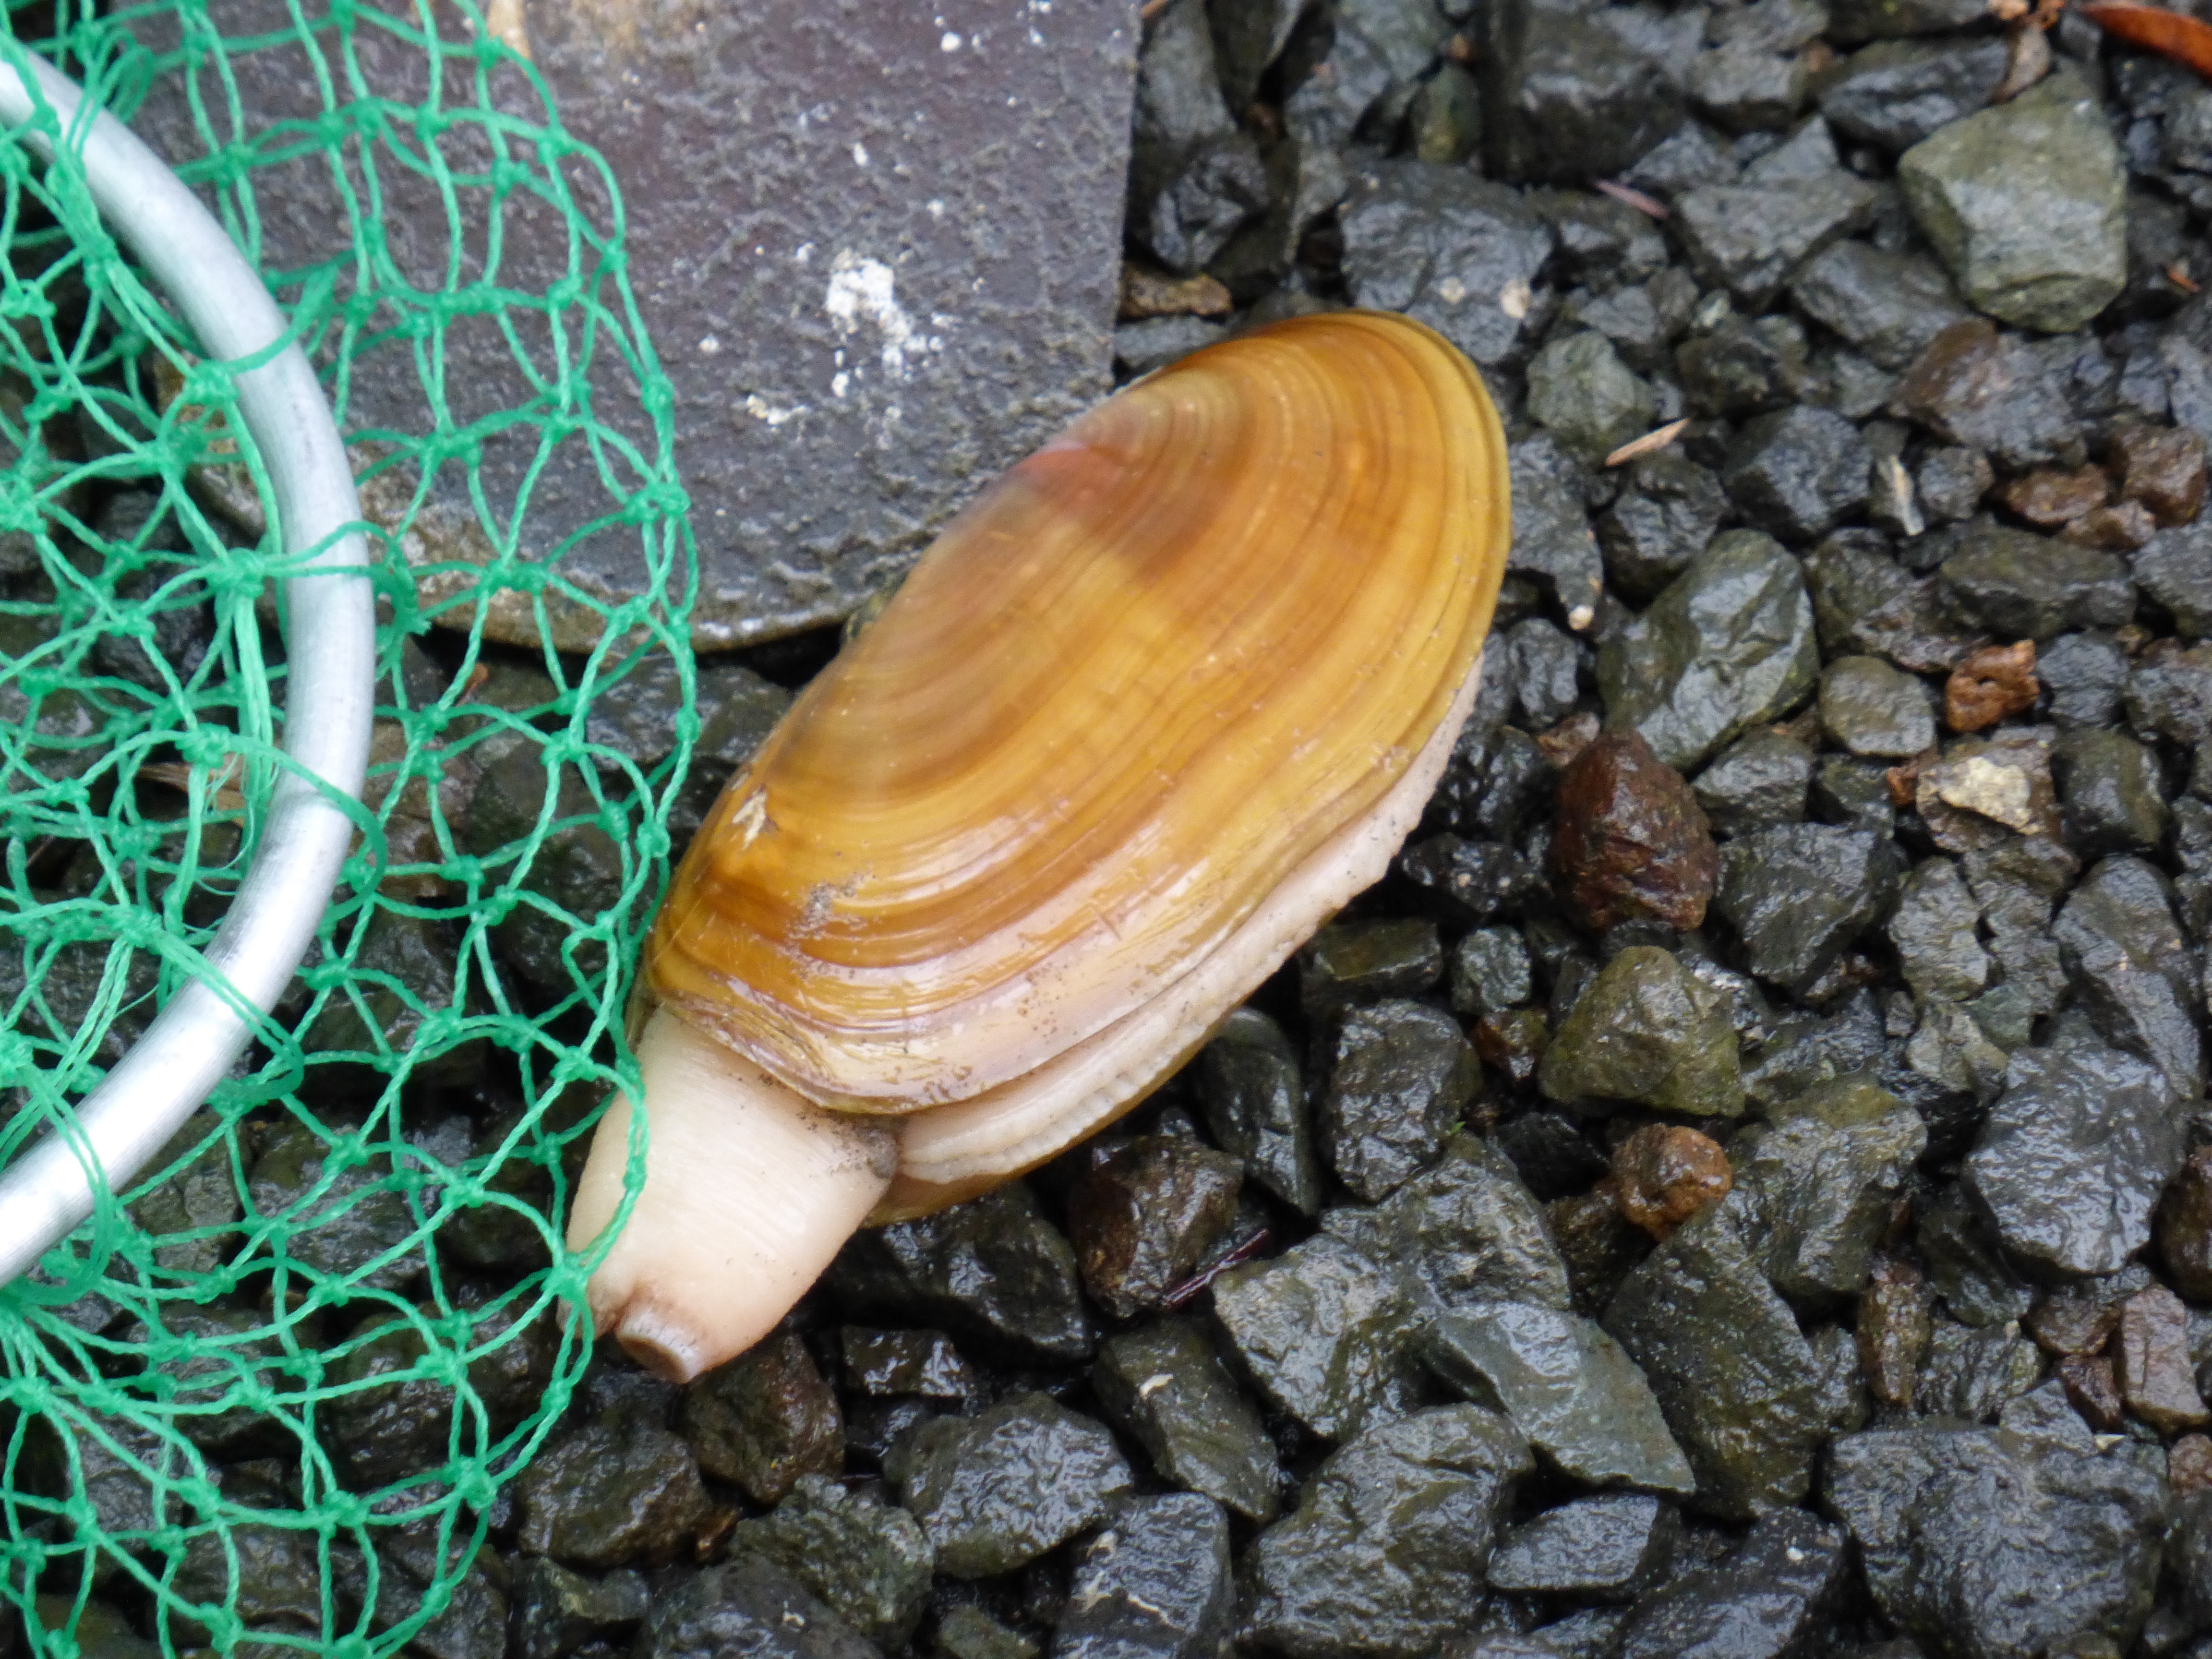 https://projectrazorclam.org/wp-content/uploads/2018/02/P1010366-clam-net.jpg